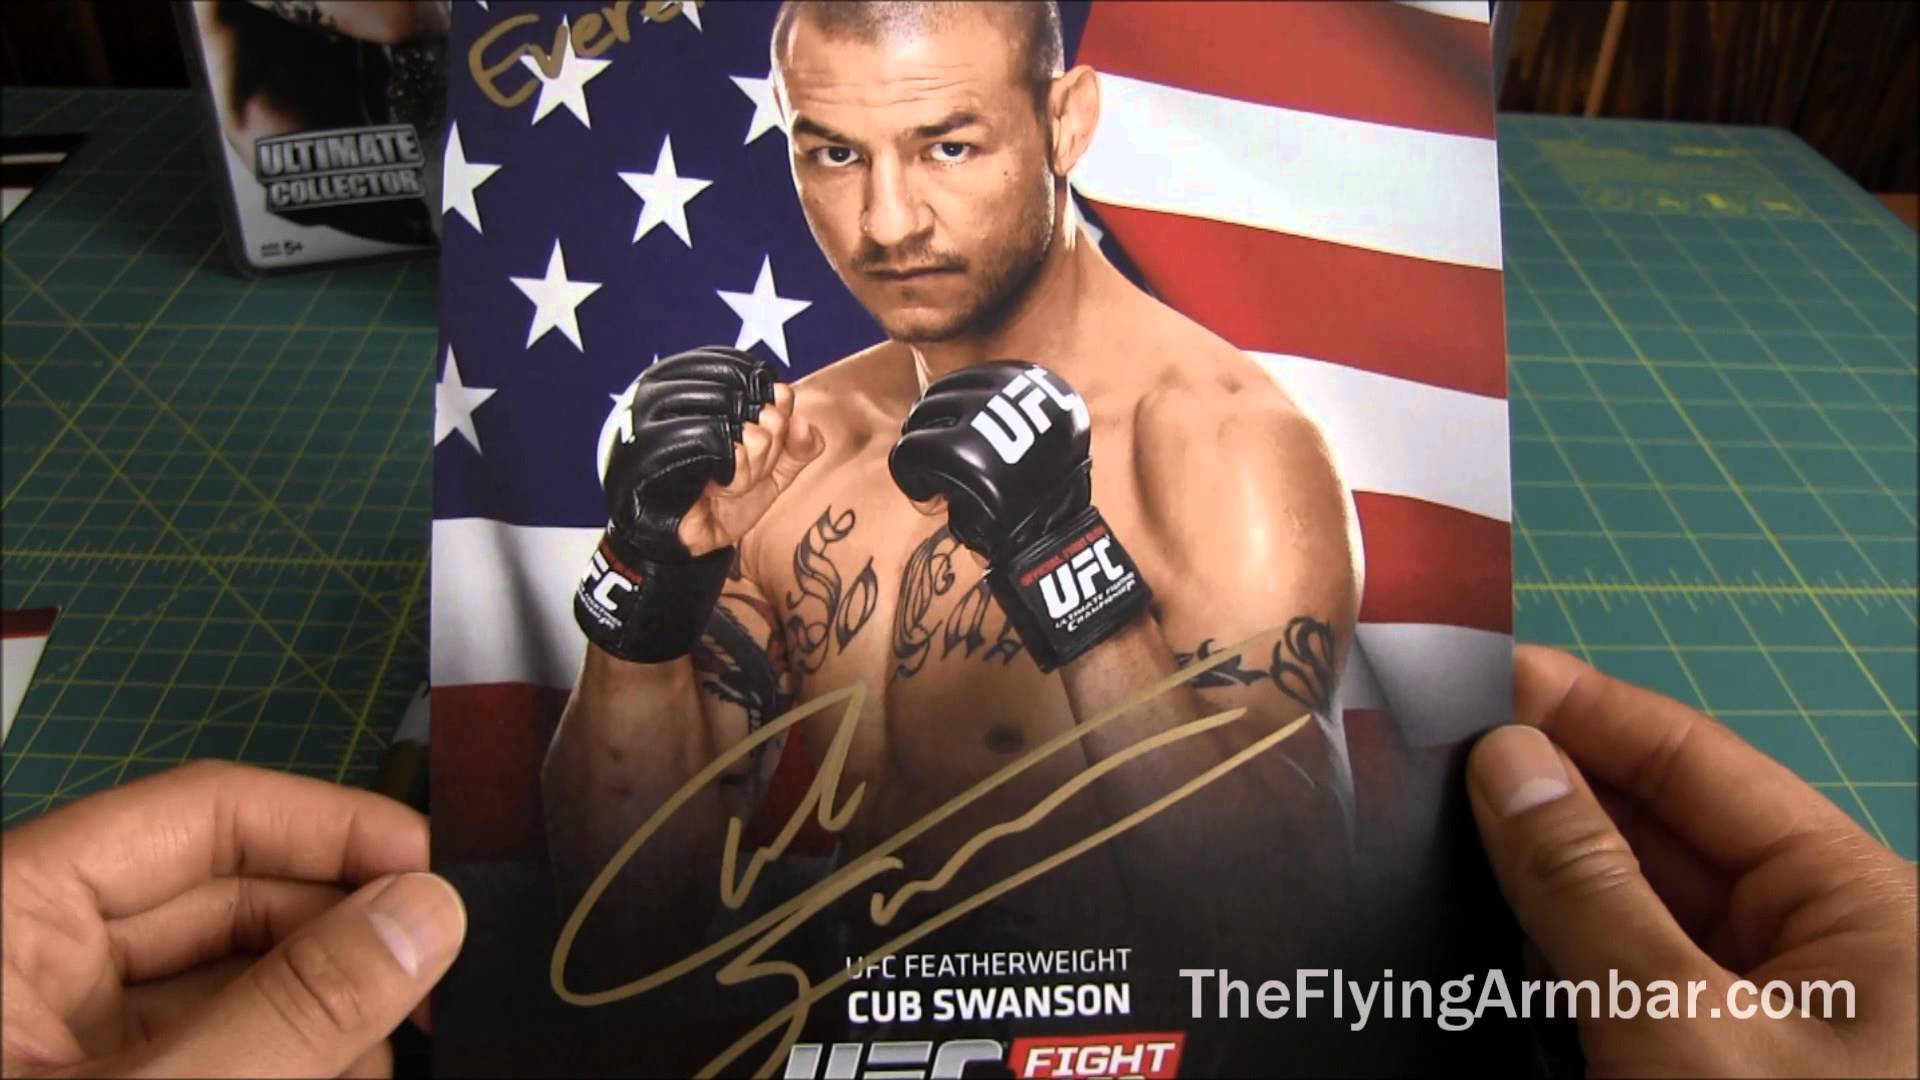 Cub Swanson Experience Meeting Him at the 2014 UFC Fan Expo